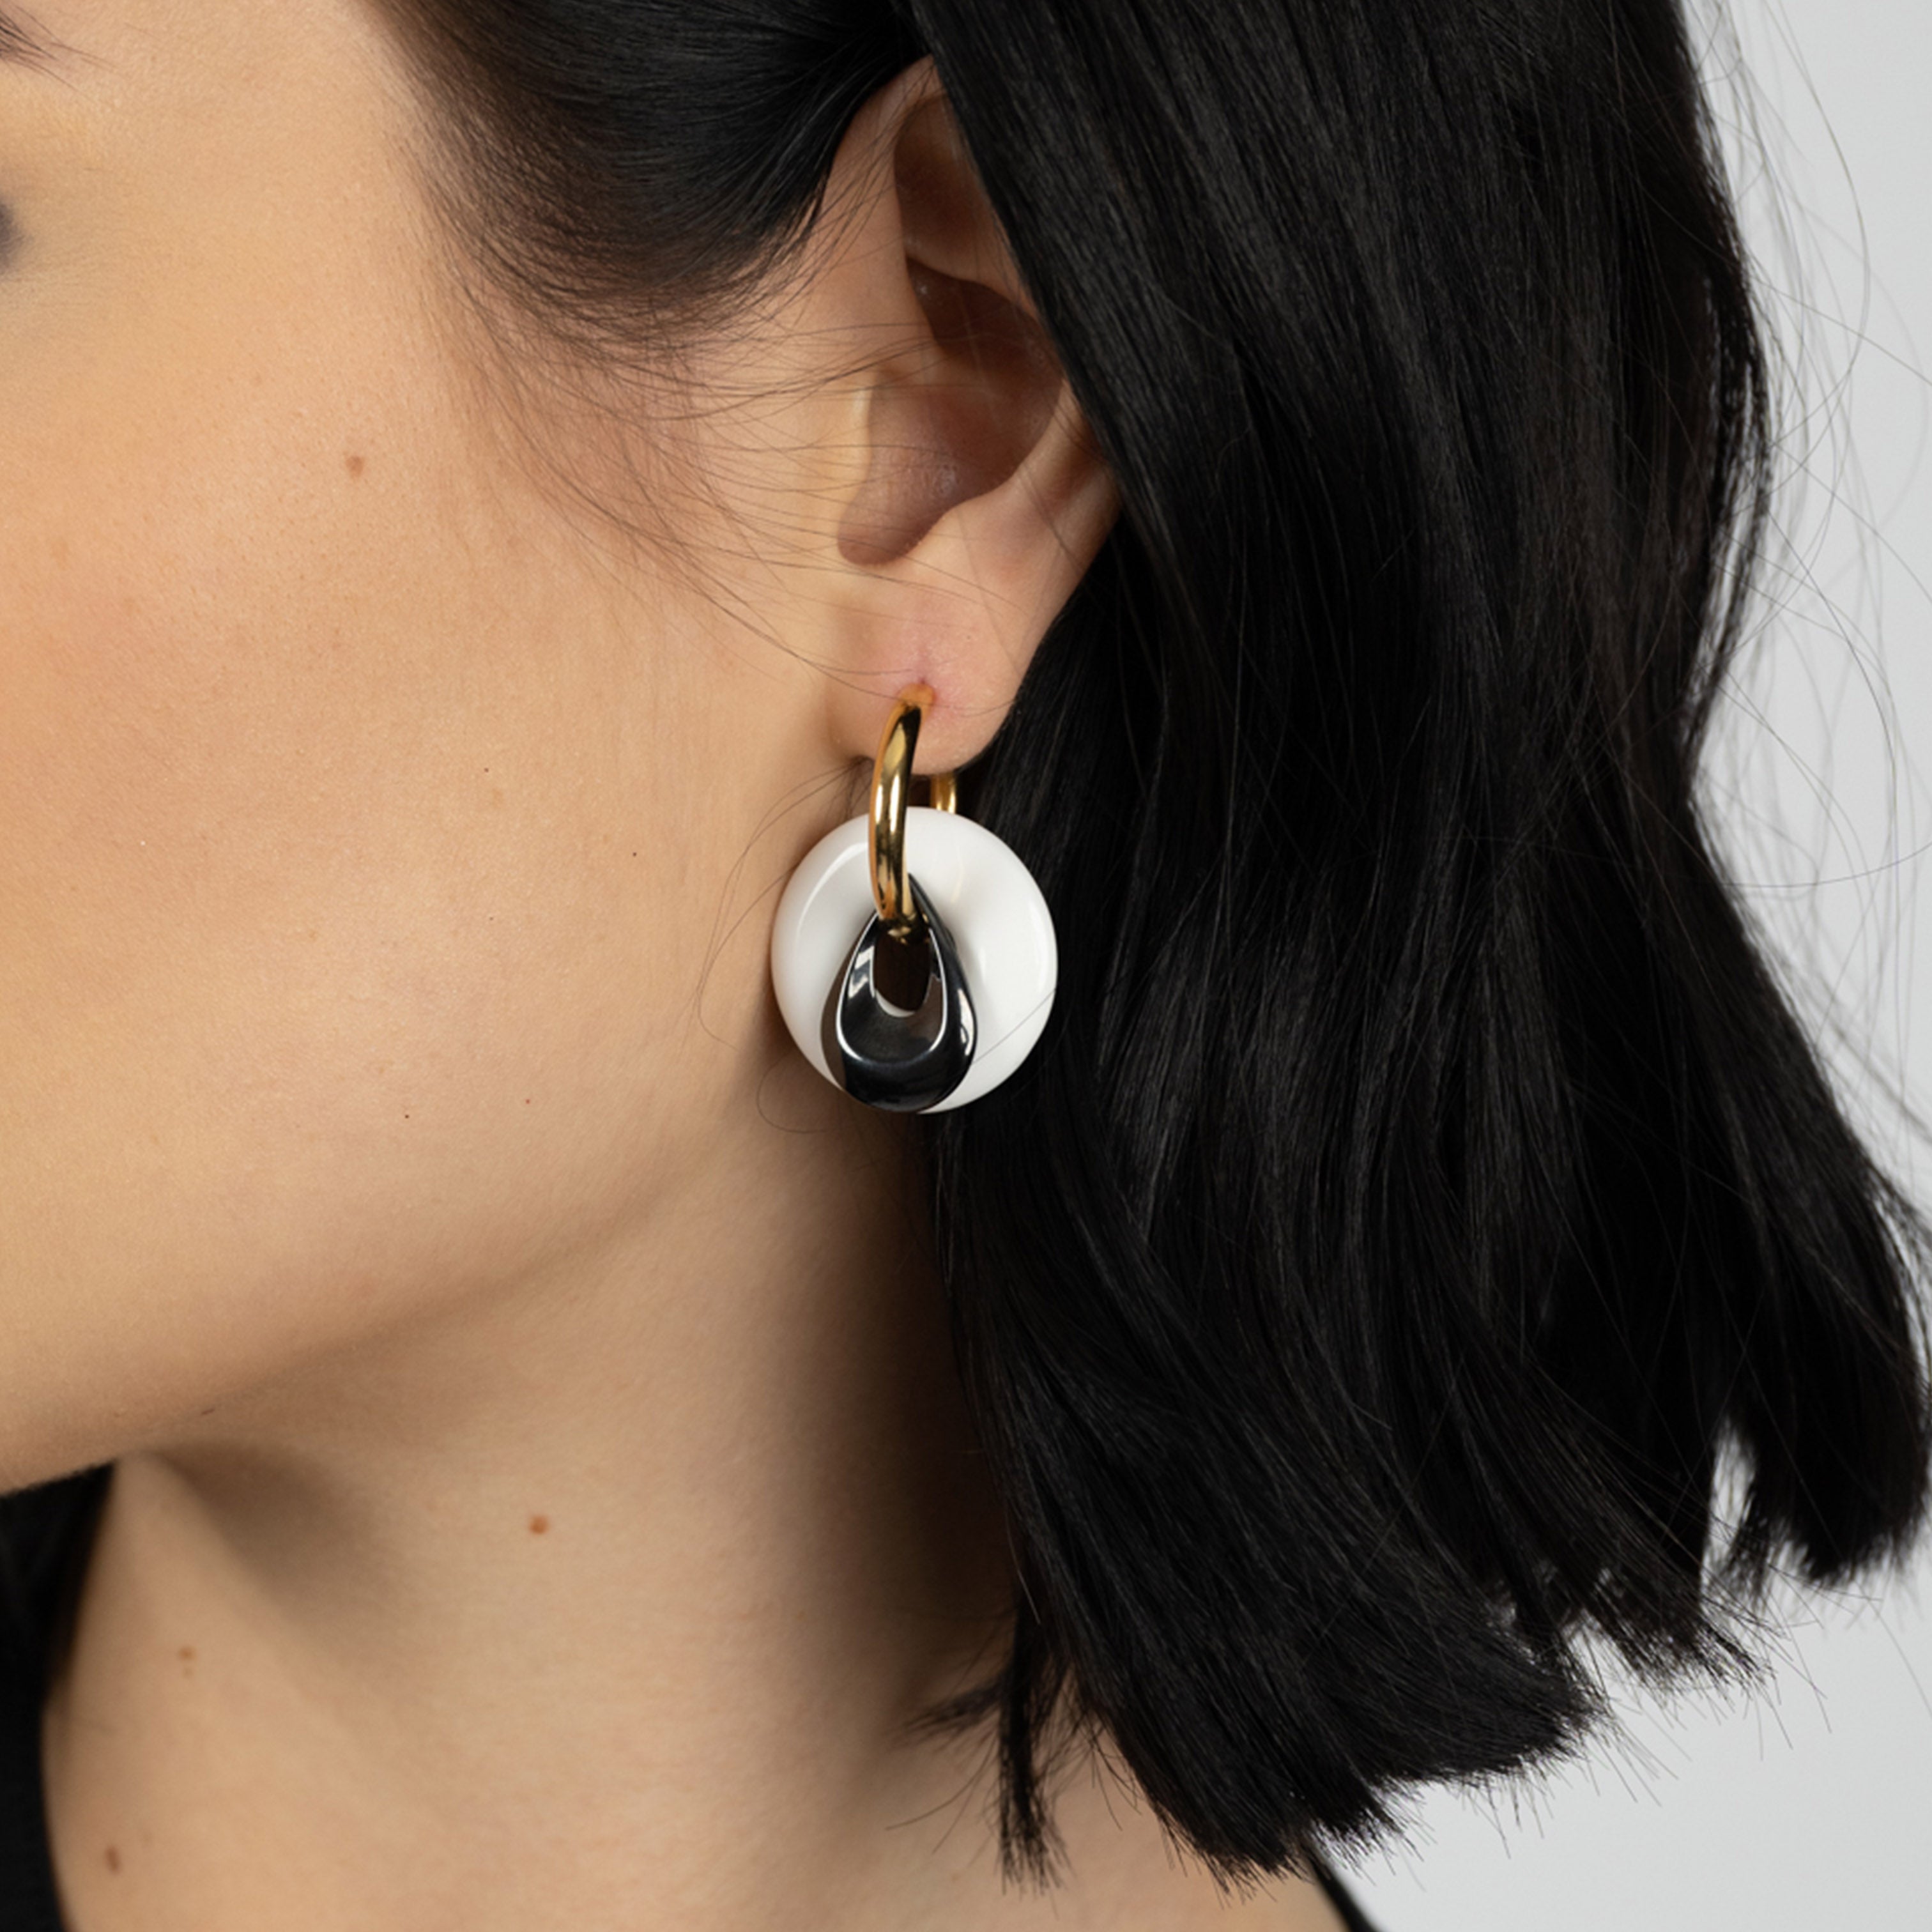 Discover Unique Hematite Earrings by Gosia Orlowska